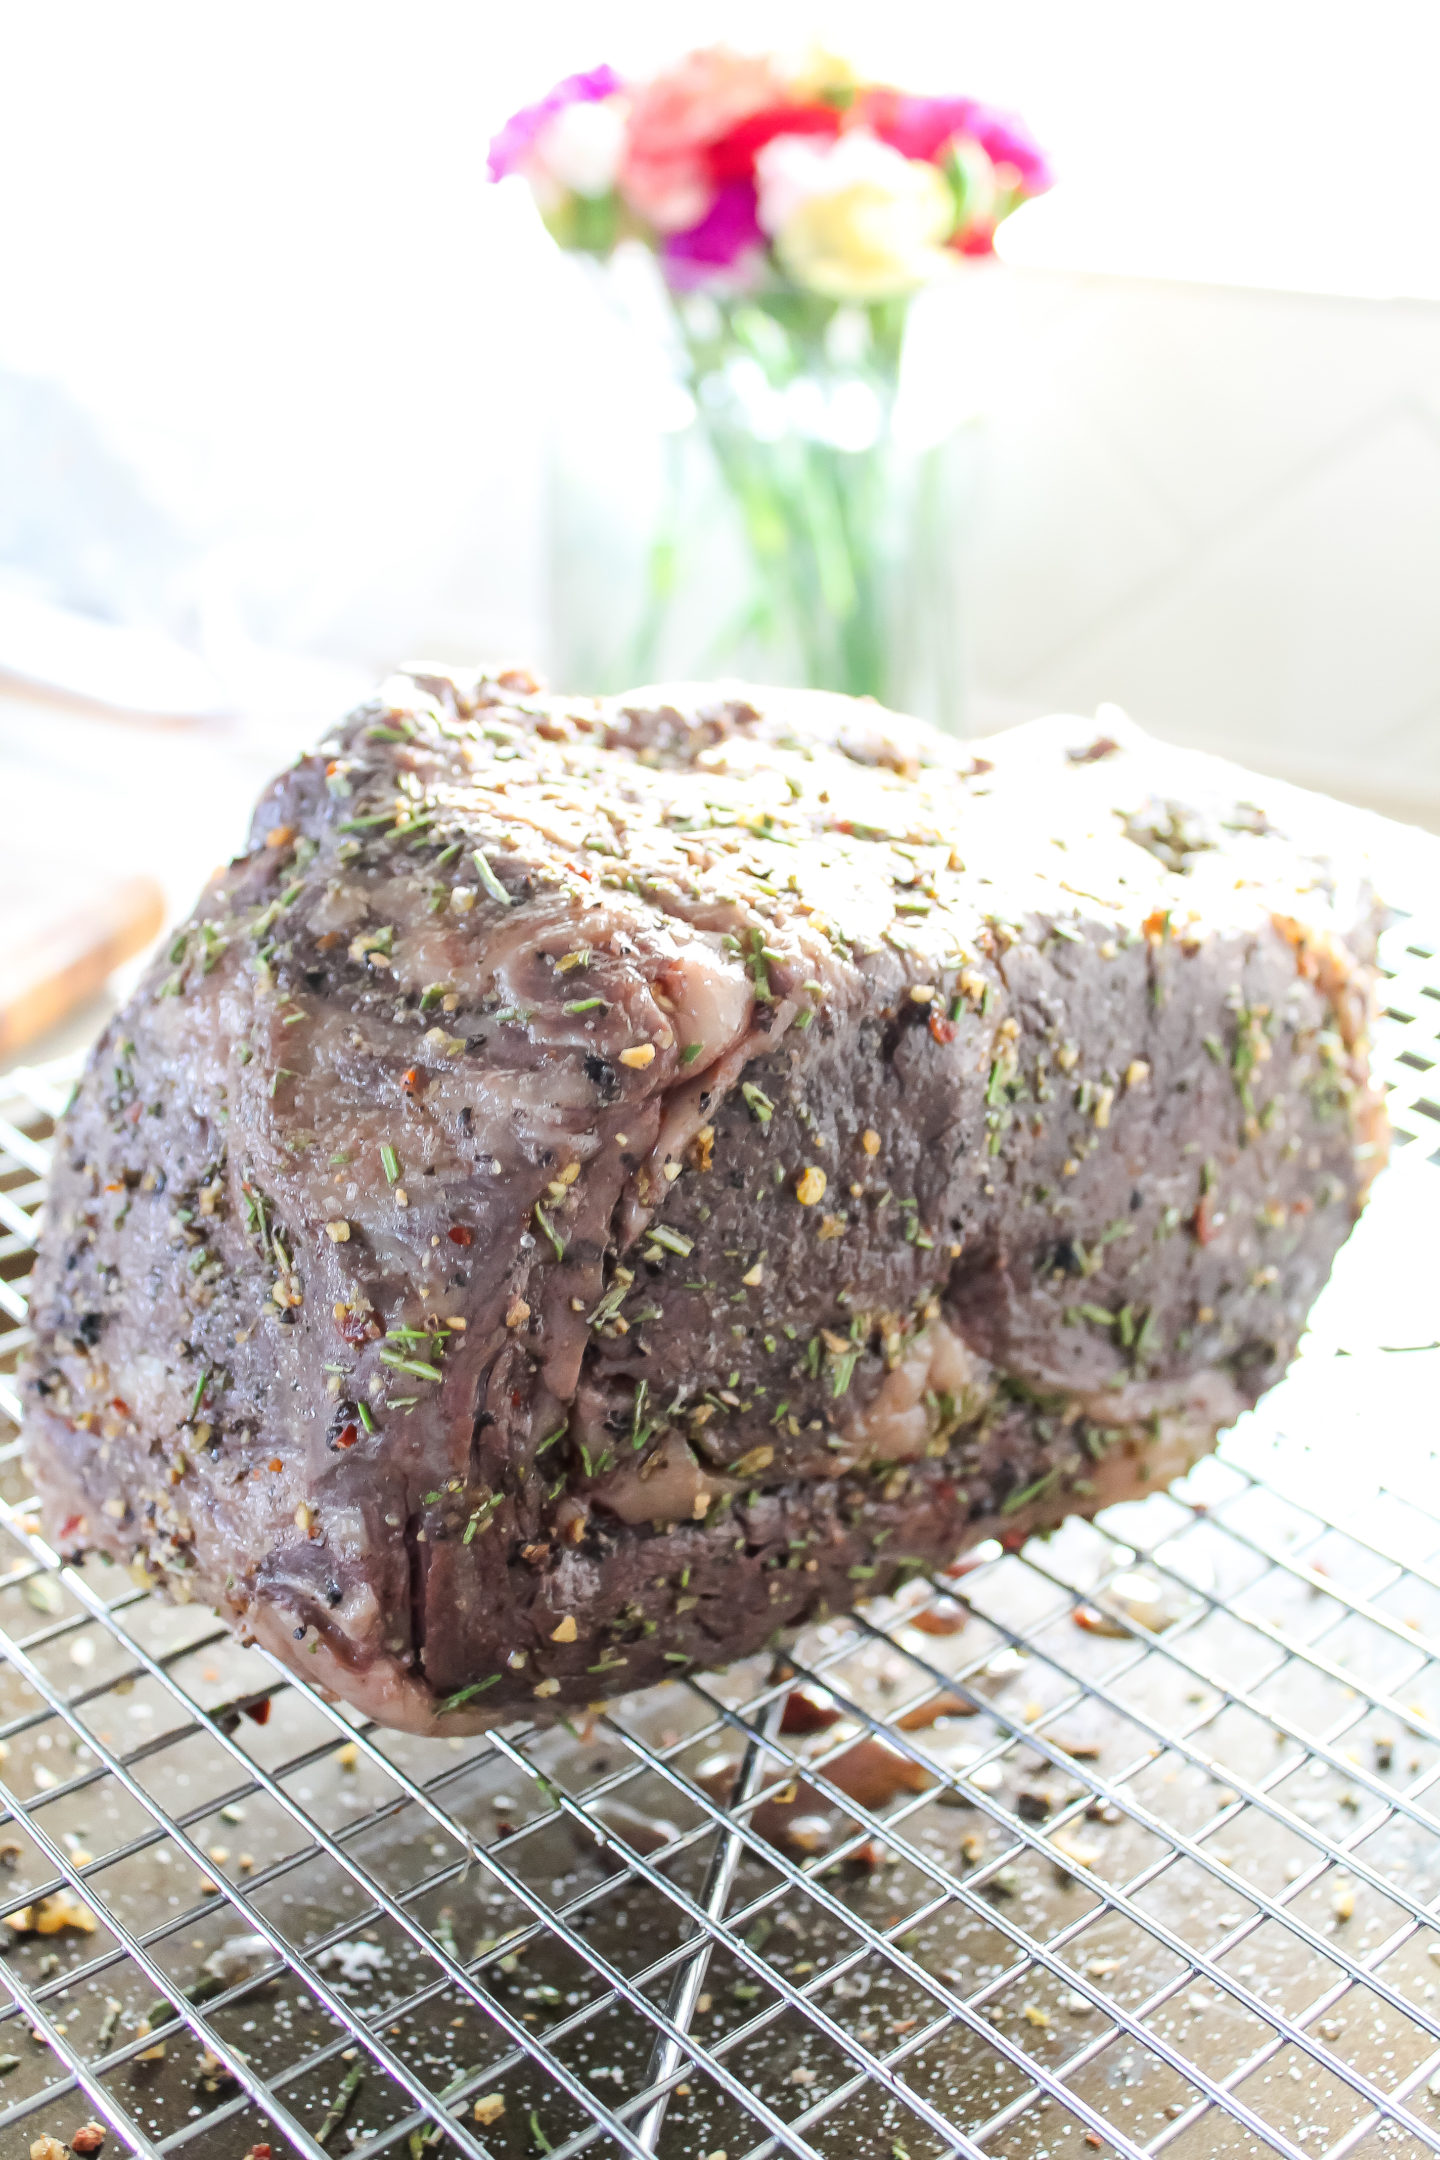 How to make the perfect prime rib using using a sous-vide! Grab your FoodSaver bags and sealing system and high quality prime rib for the best meal ever.